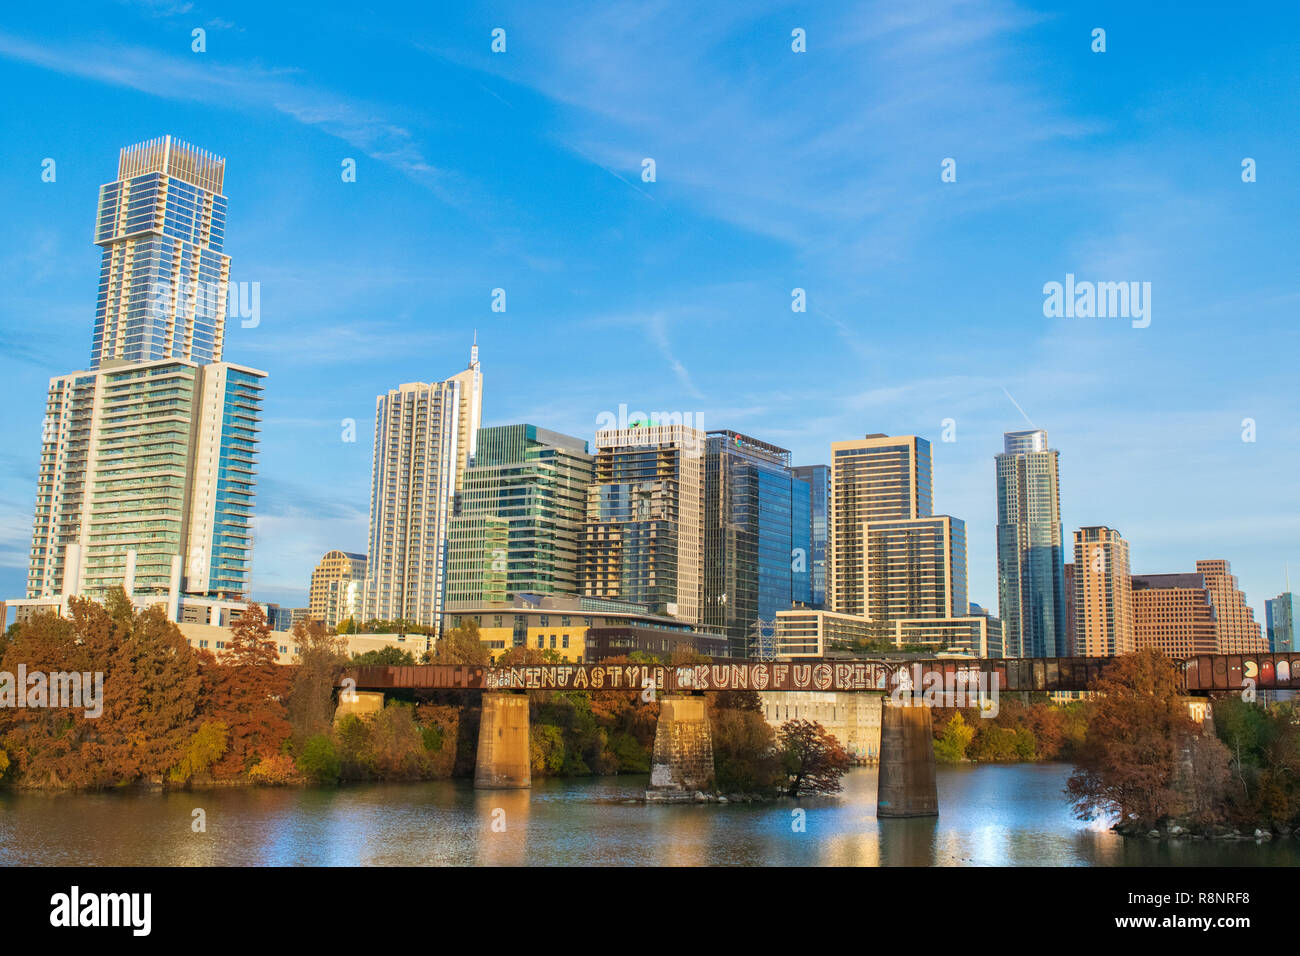 Autumn colors reflect on Lady Bird Lake under the booming skyline of Austin, Texas, consistently rated one of the best places to live in the USA. Stock Photo